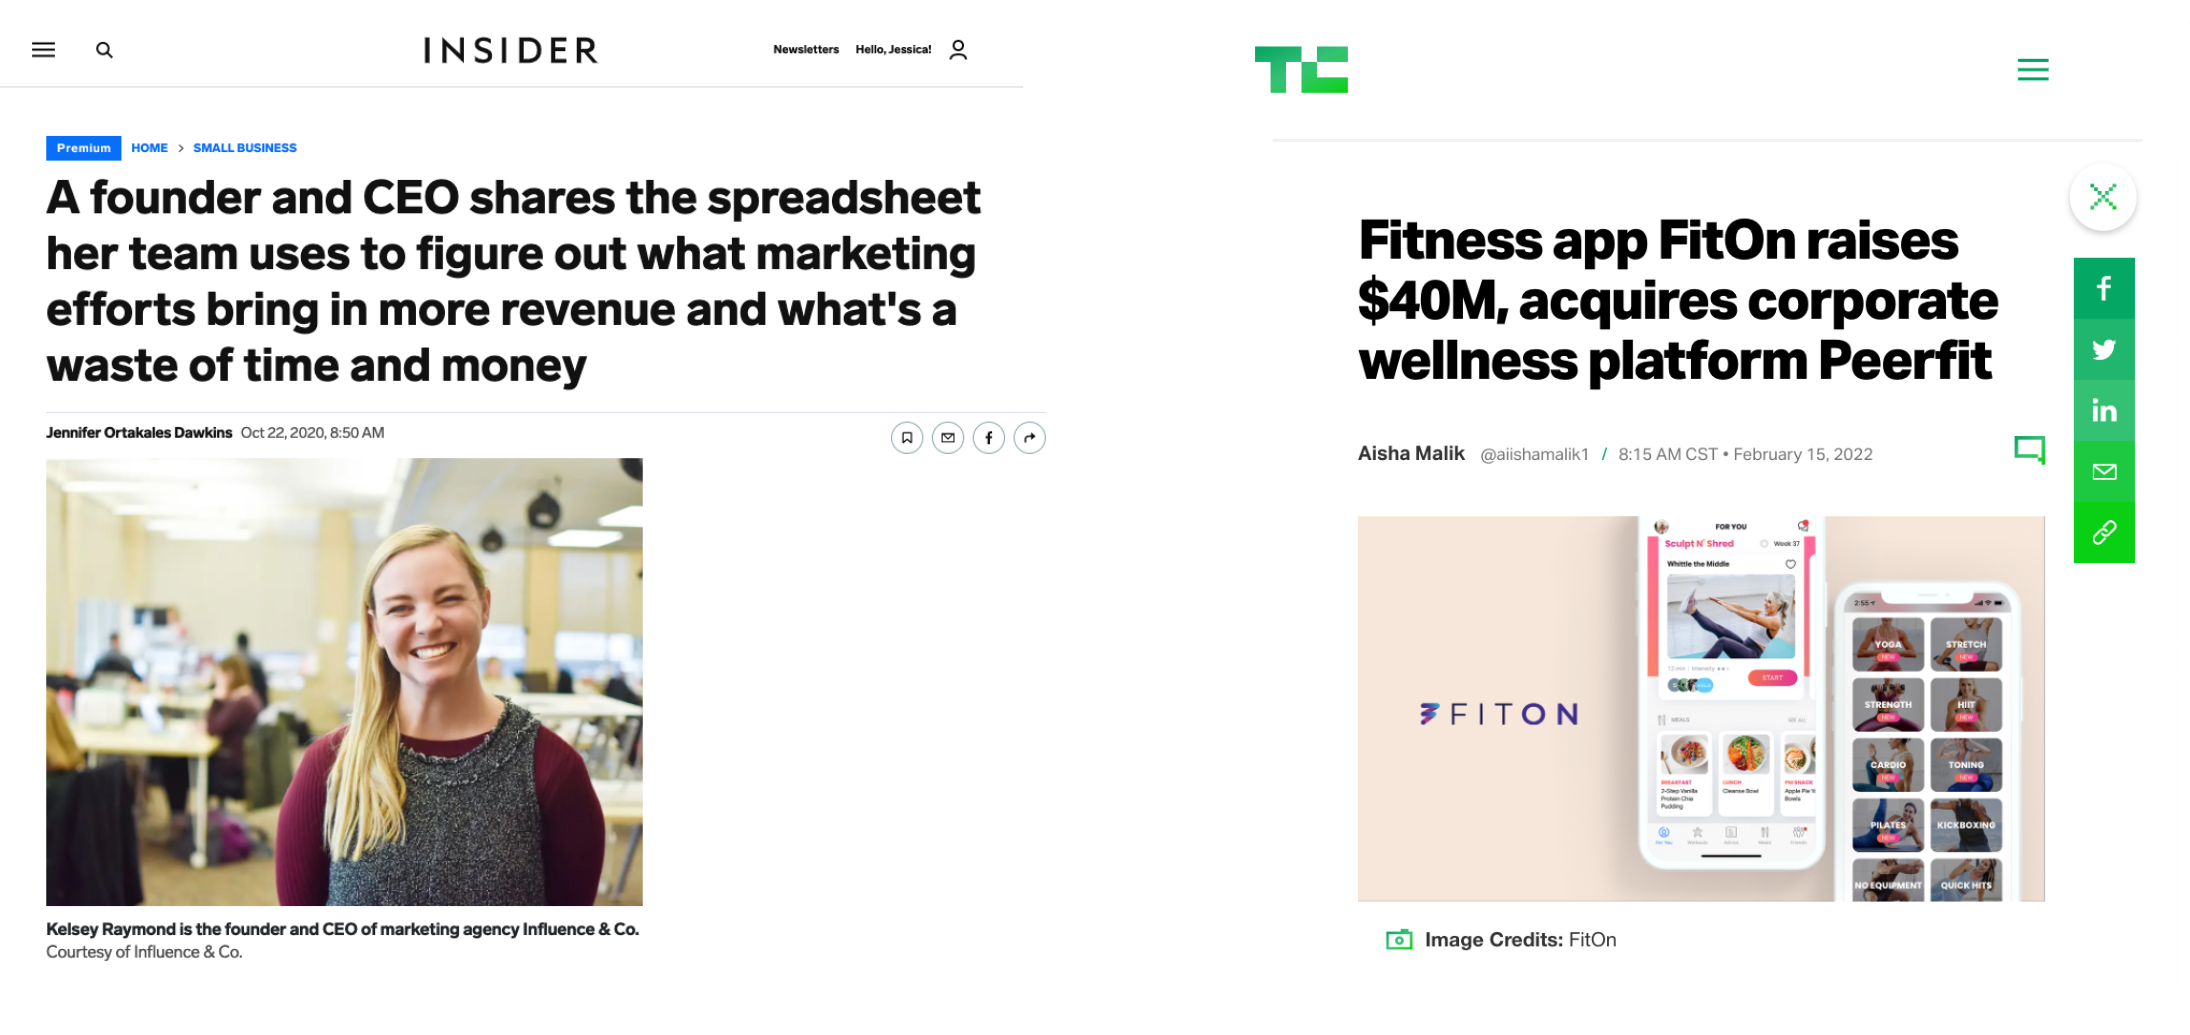 PR feature example image content: Business Insider article preview, "A founder and CEO shares the spreadsheet her team uses to figure out what marketing efforts bring in more revenue and what's a waste of time and money." and TechCrunch article preview, "Fitness app FitOn raises $40M, acquires corporate wellness platform Peerfit"